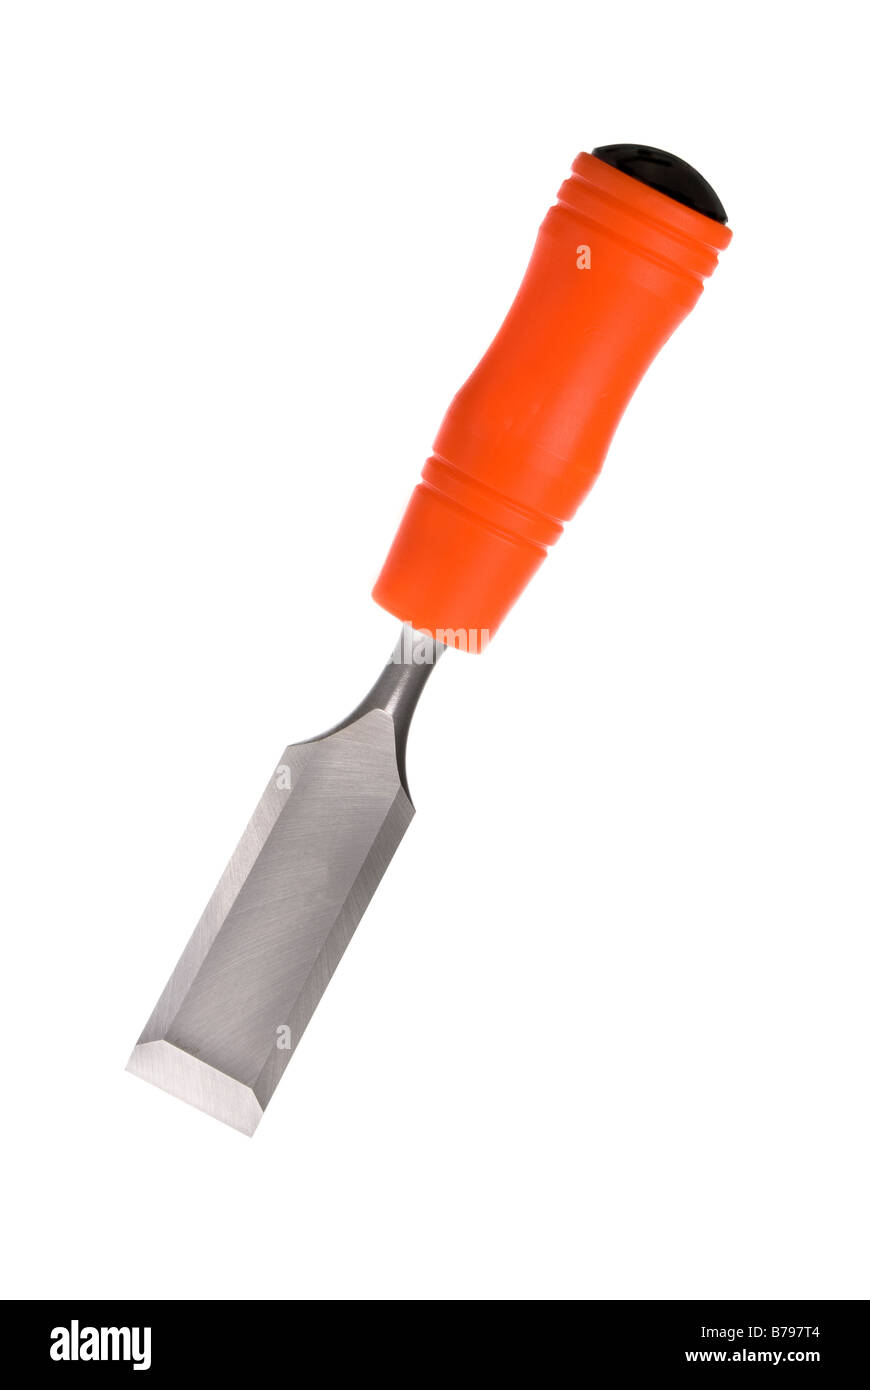 A sharp chisel isolated on a white background The image can be used for any tooling fabrication or construction inference Stock Photo